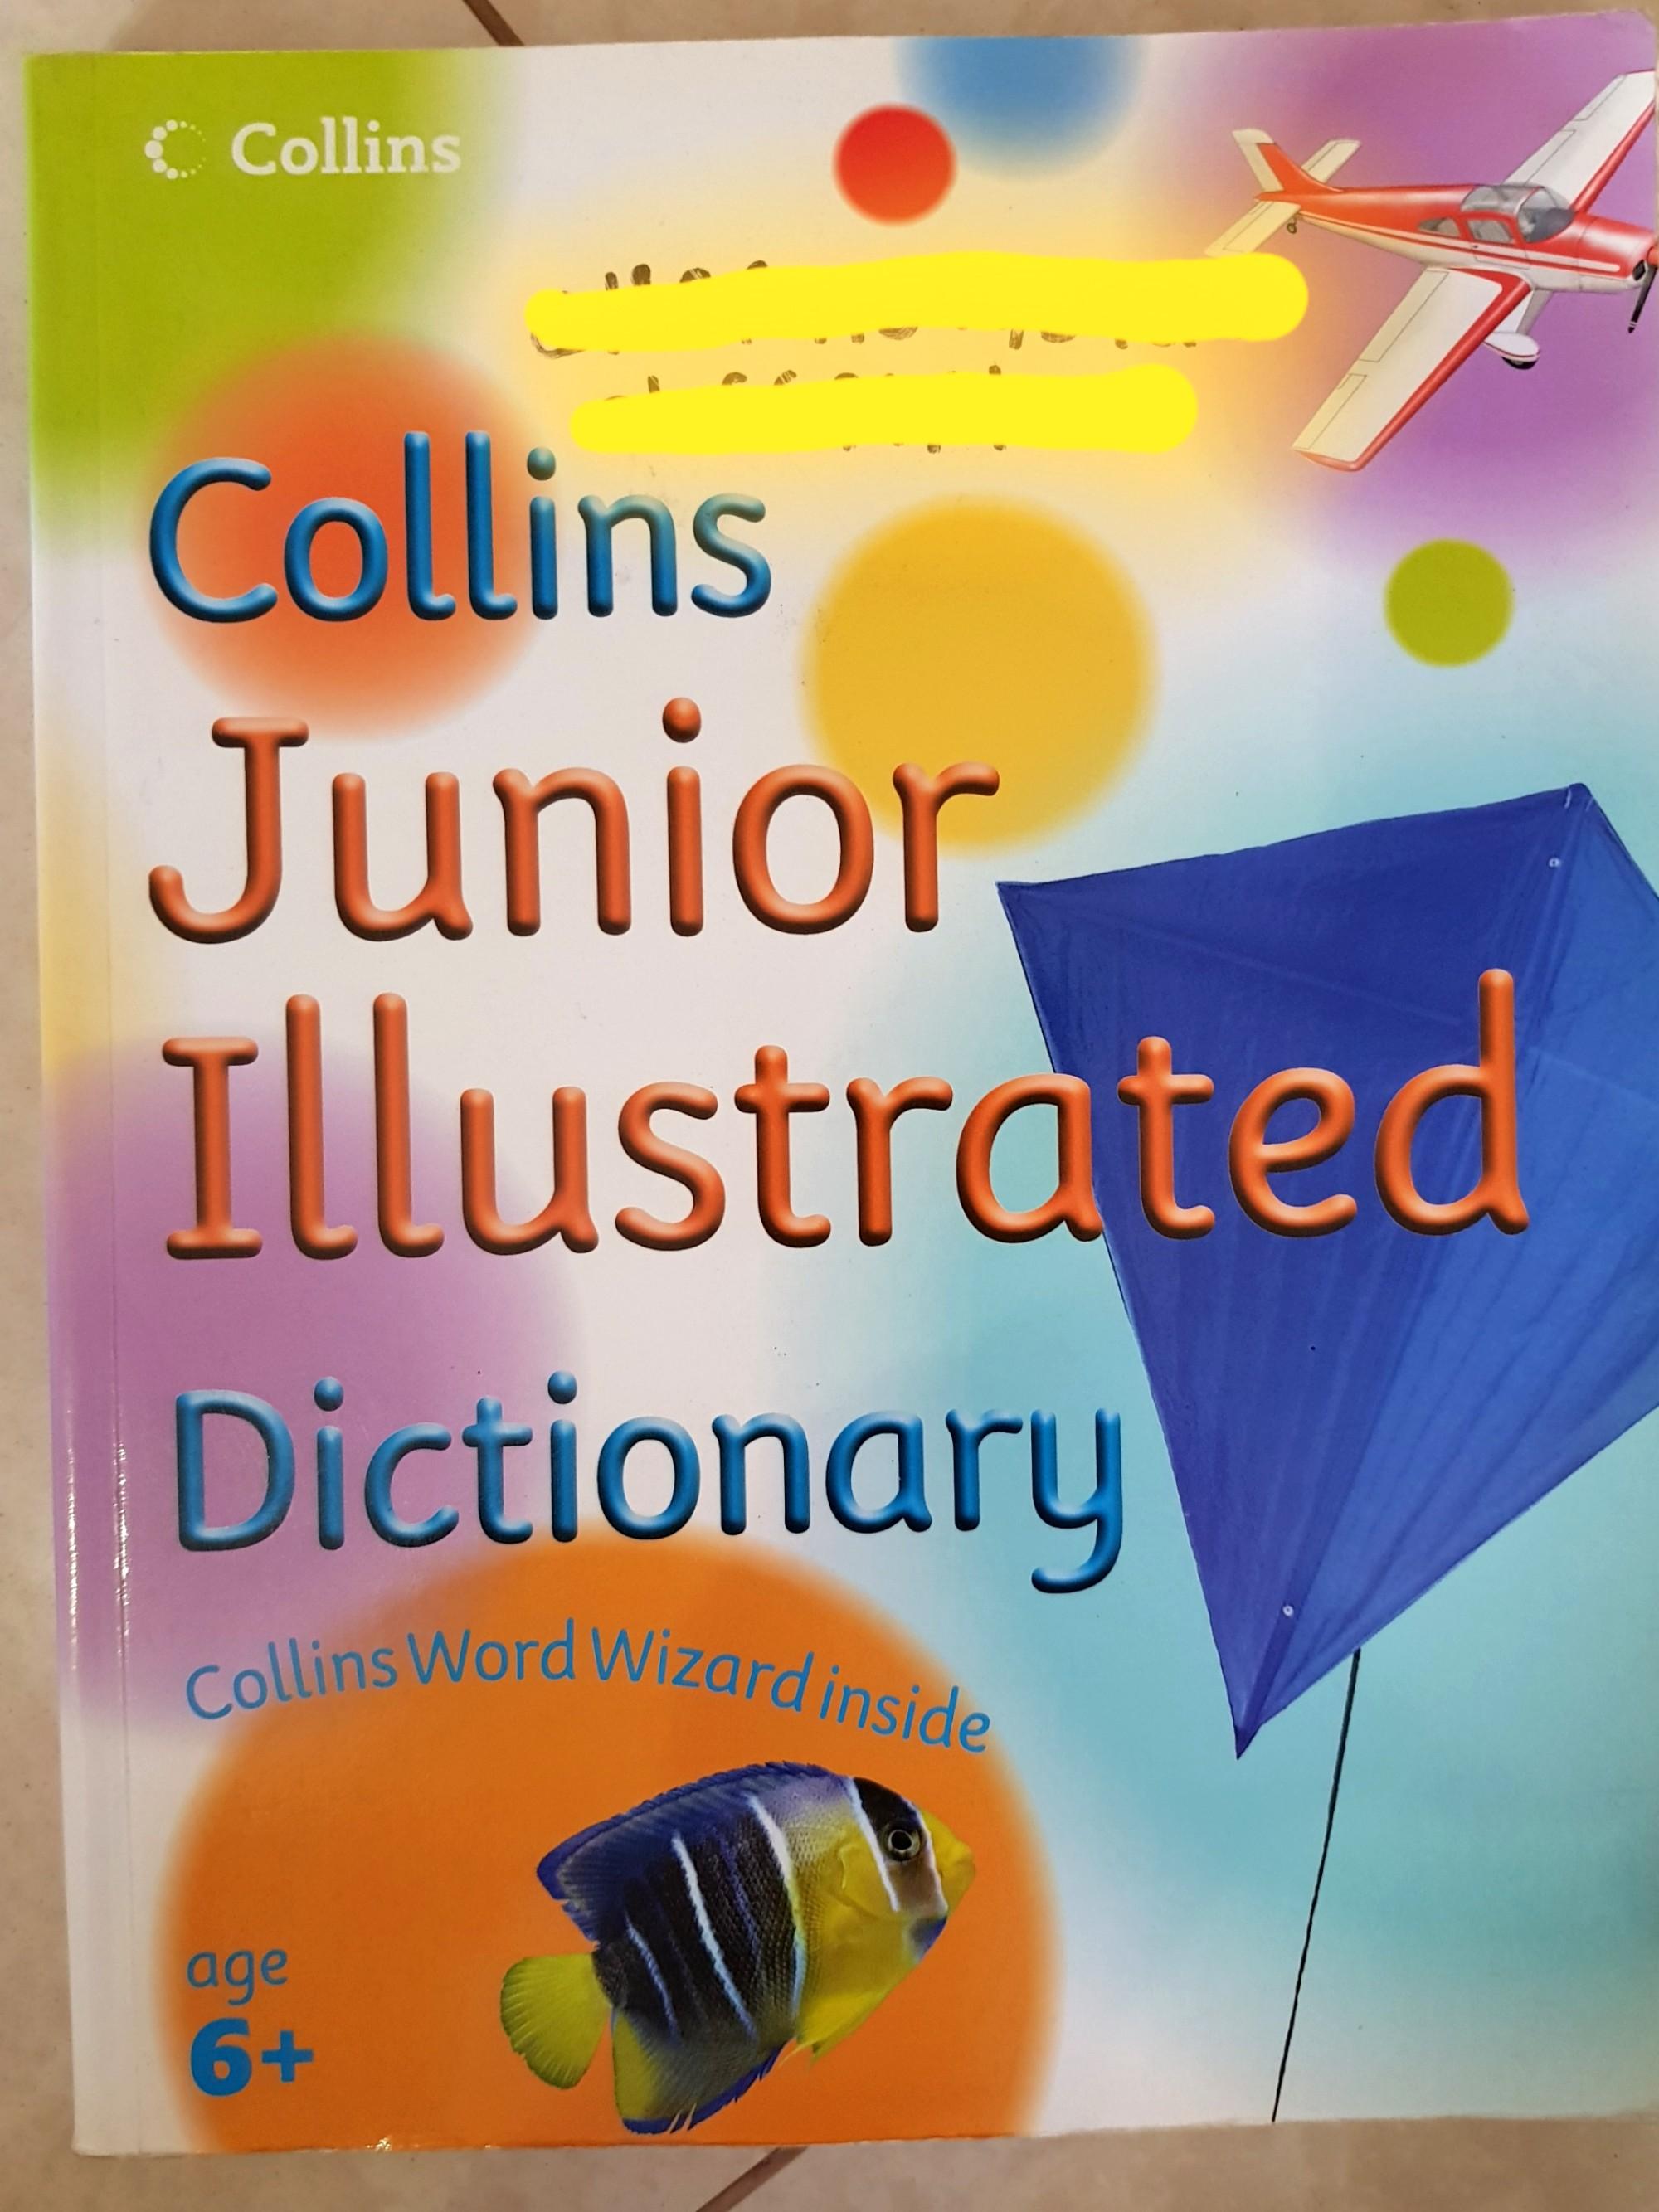 Books　Toys,　COLLINS　Children's　BN　DICTIONARY,　ILLUSTRATED　CHILDREN　Magazines,　on　Hobbies　Books　Carousell